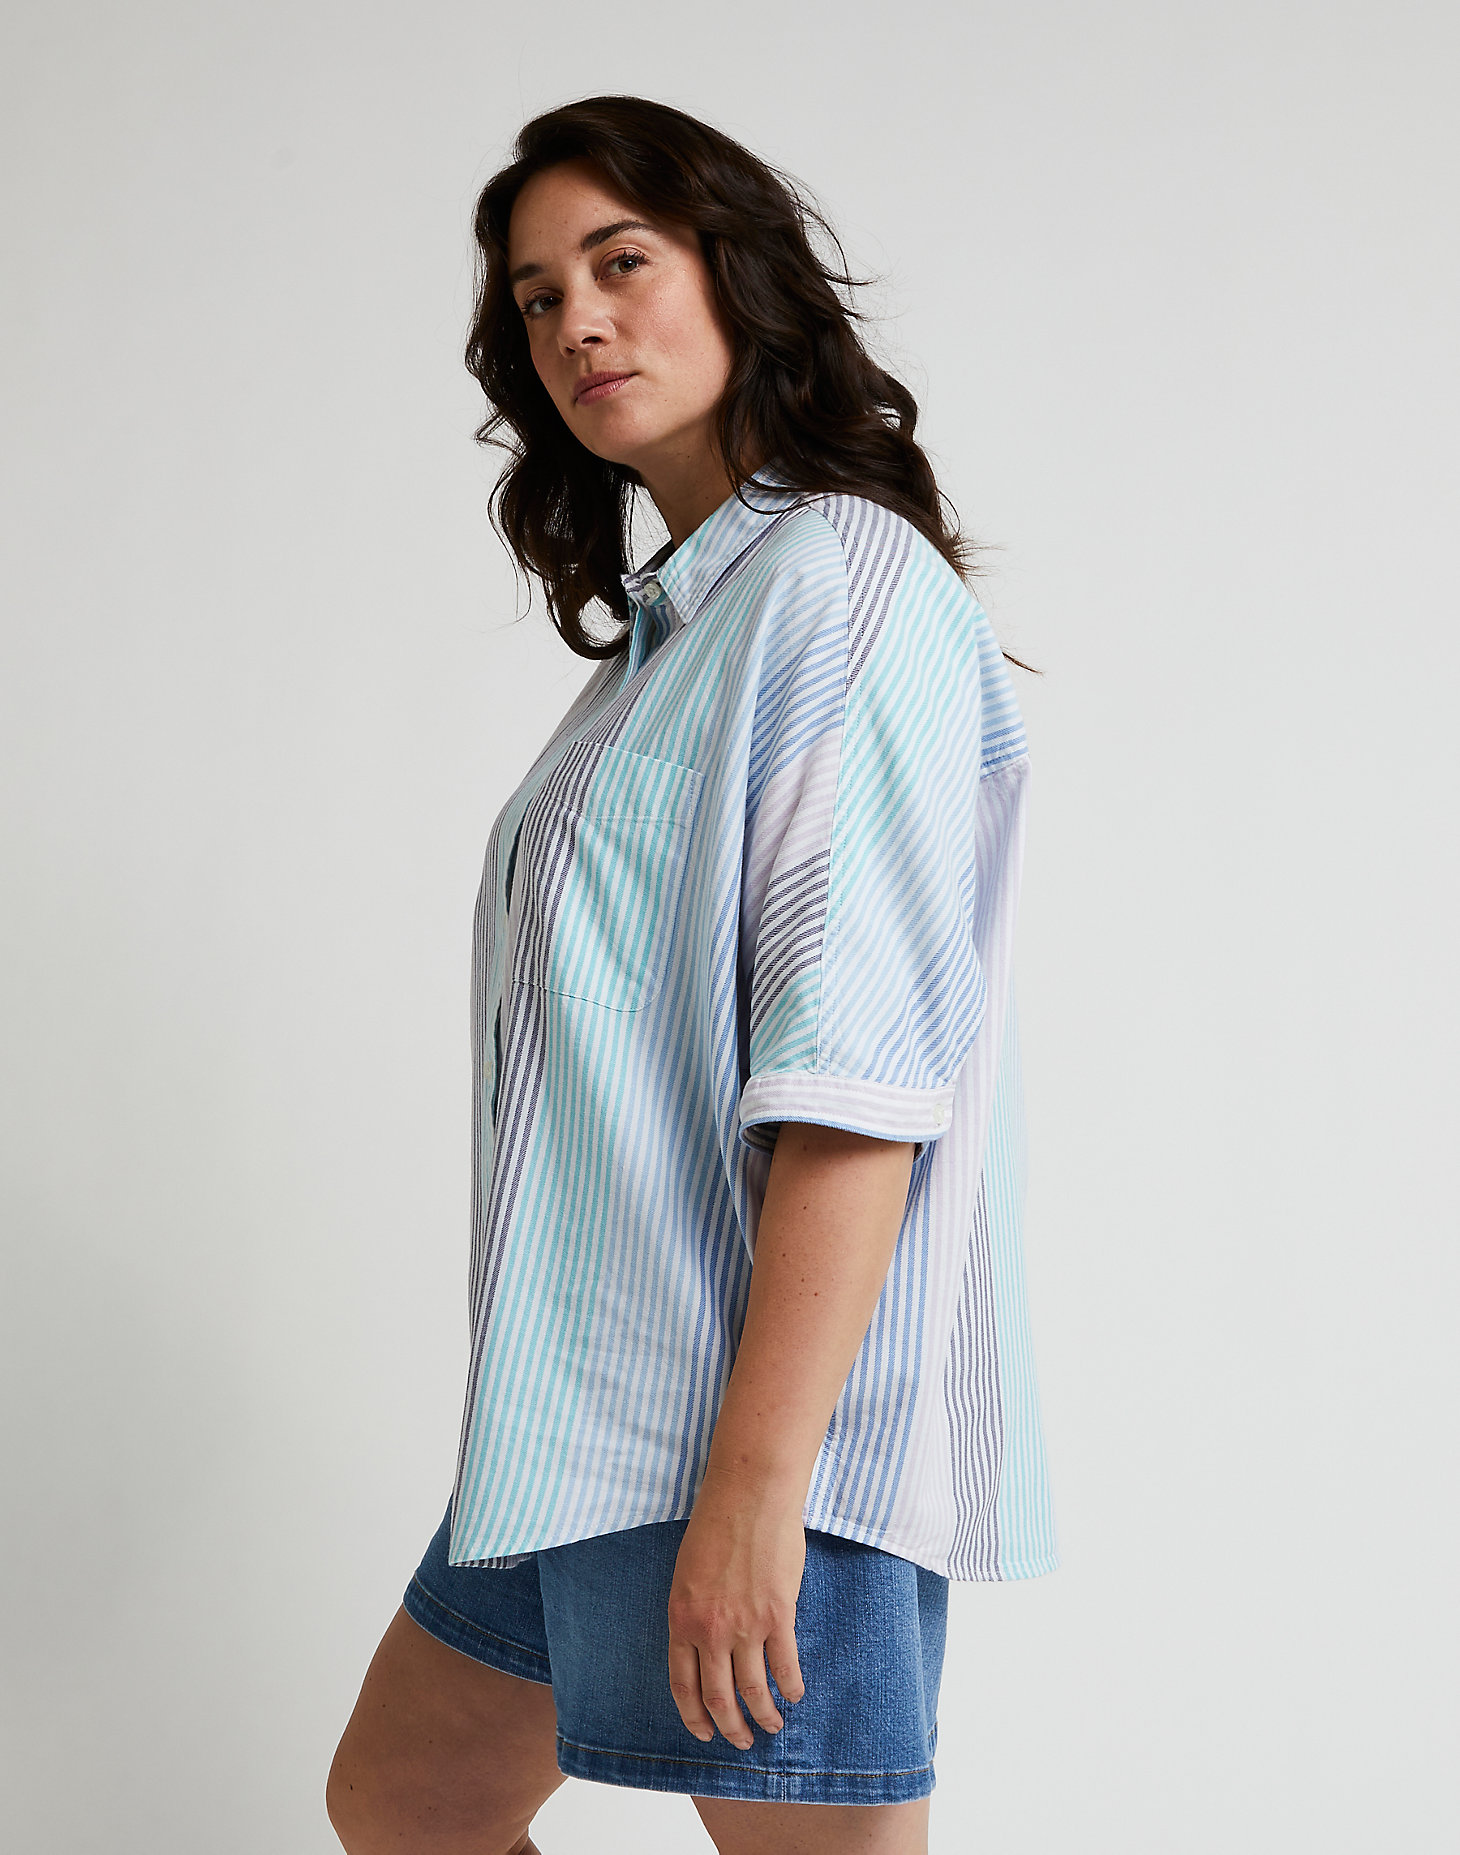 Relaxed One Pocket Shirt in Ferris alternative view 3